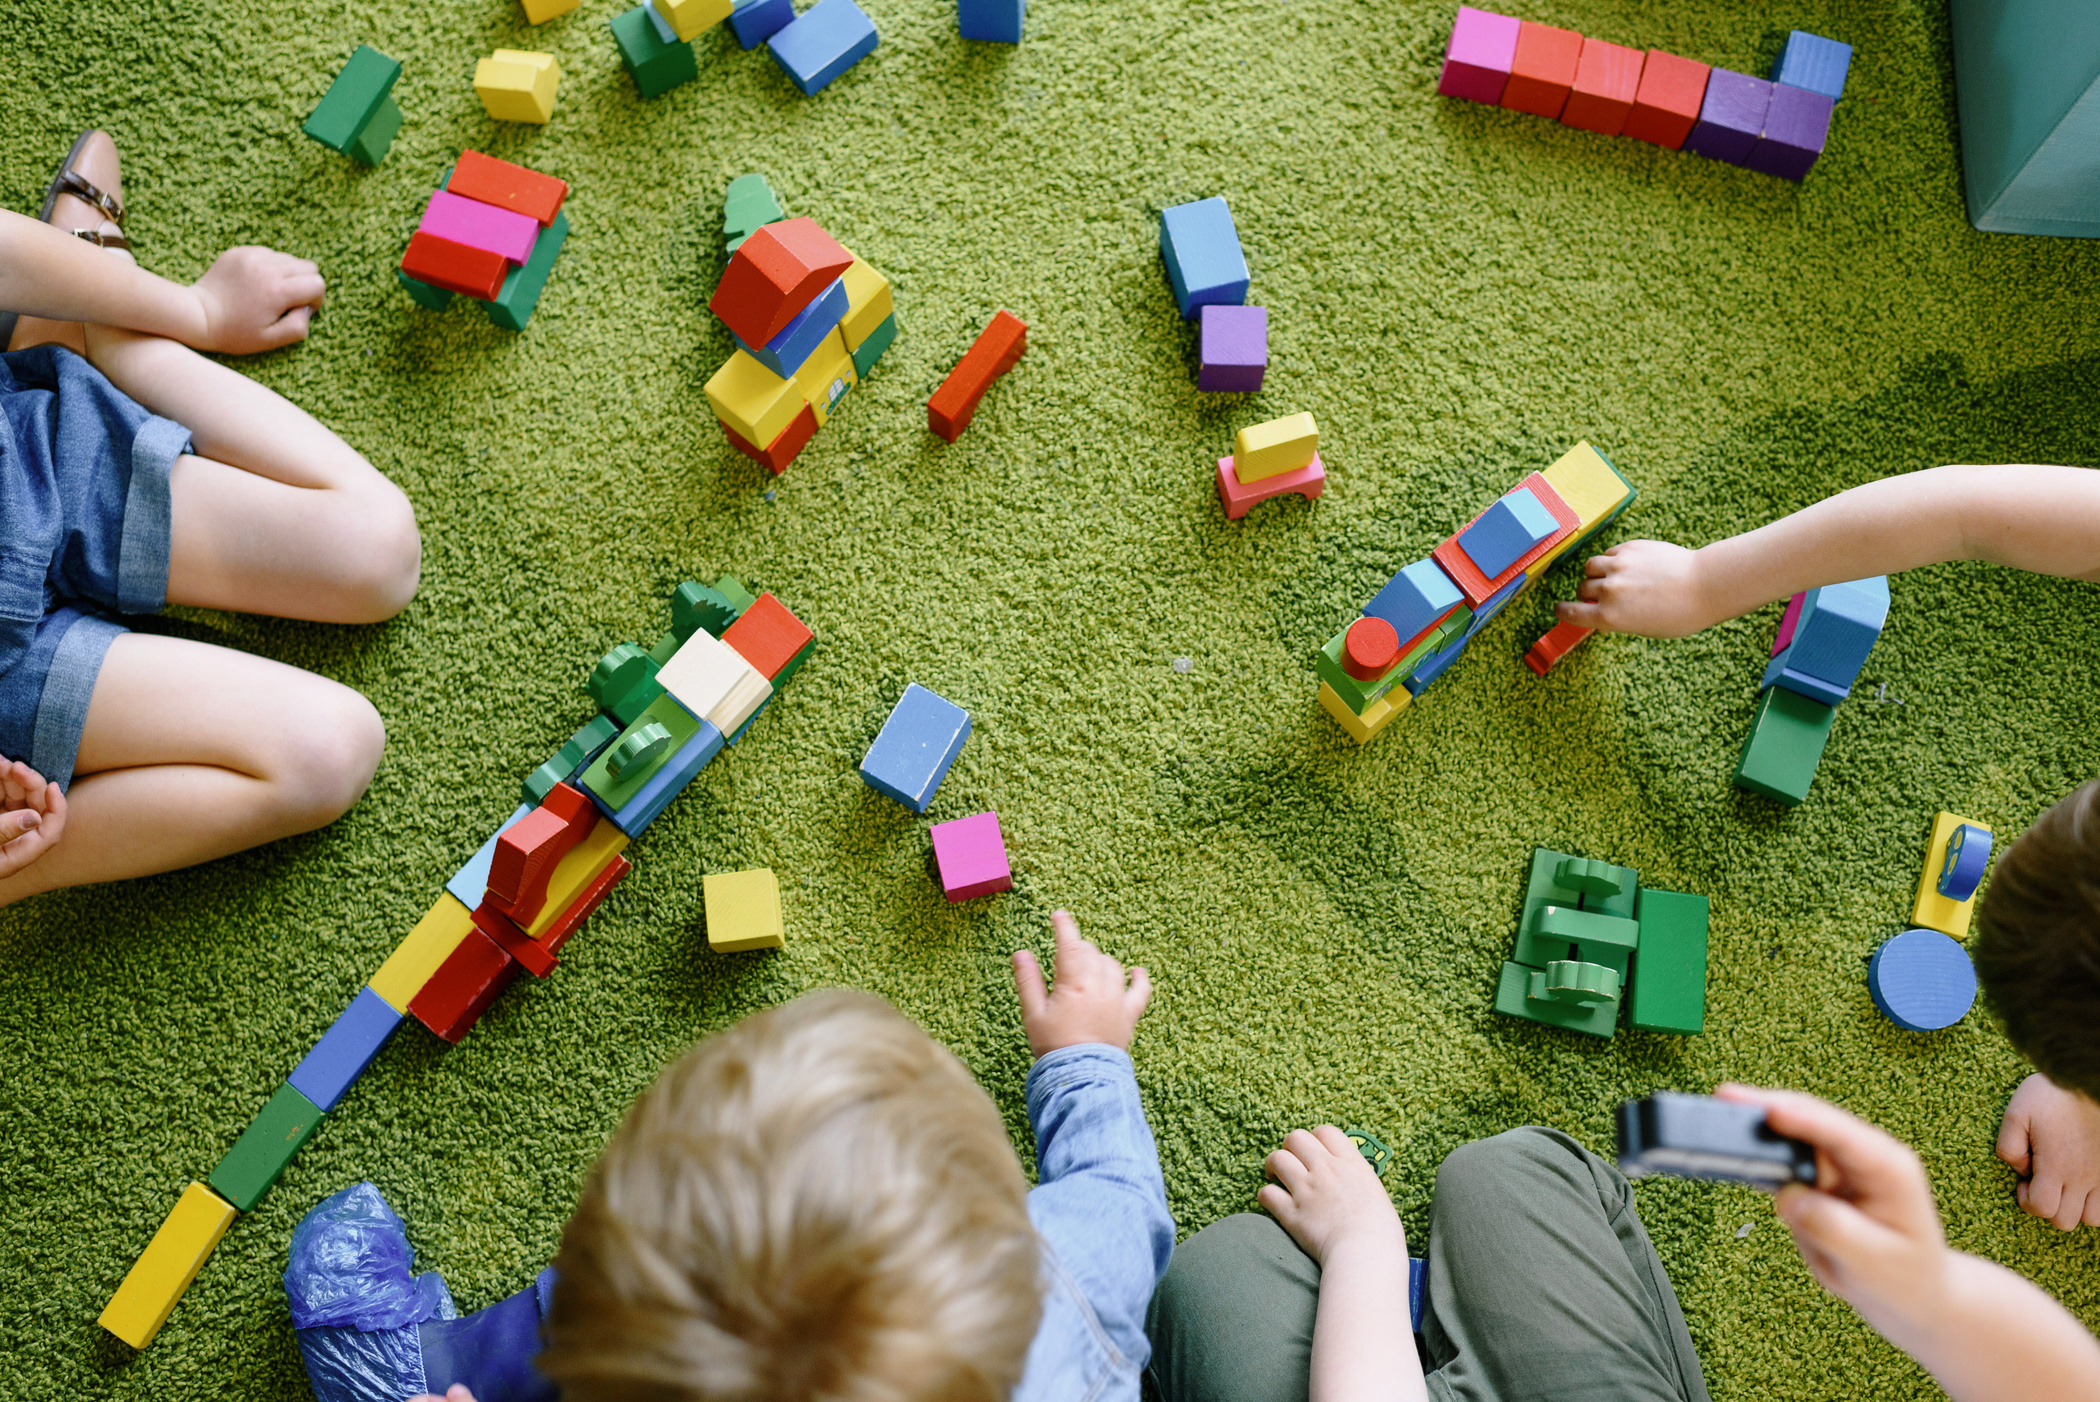 Children Playing with Colorful Wooden Blocks